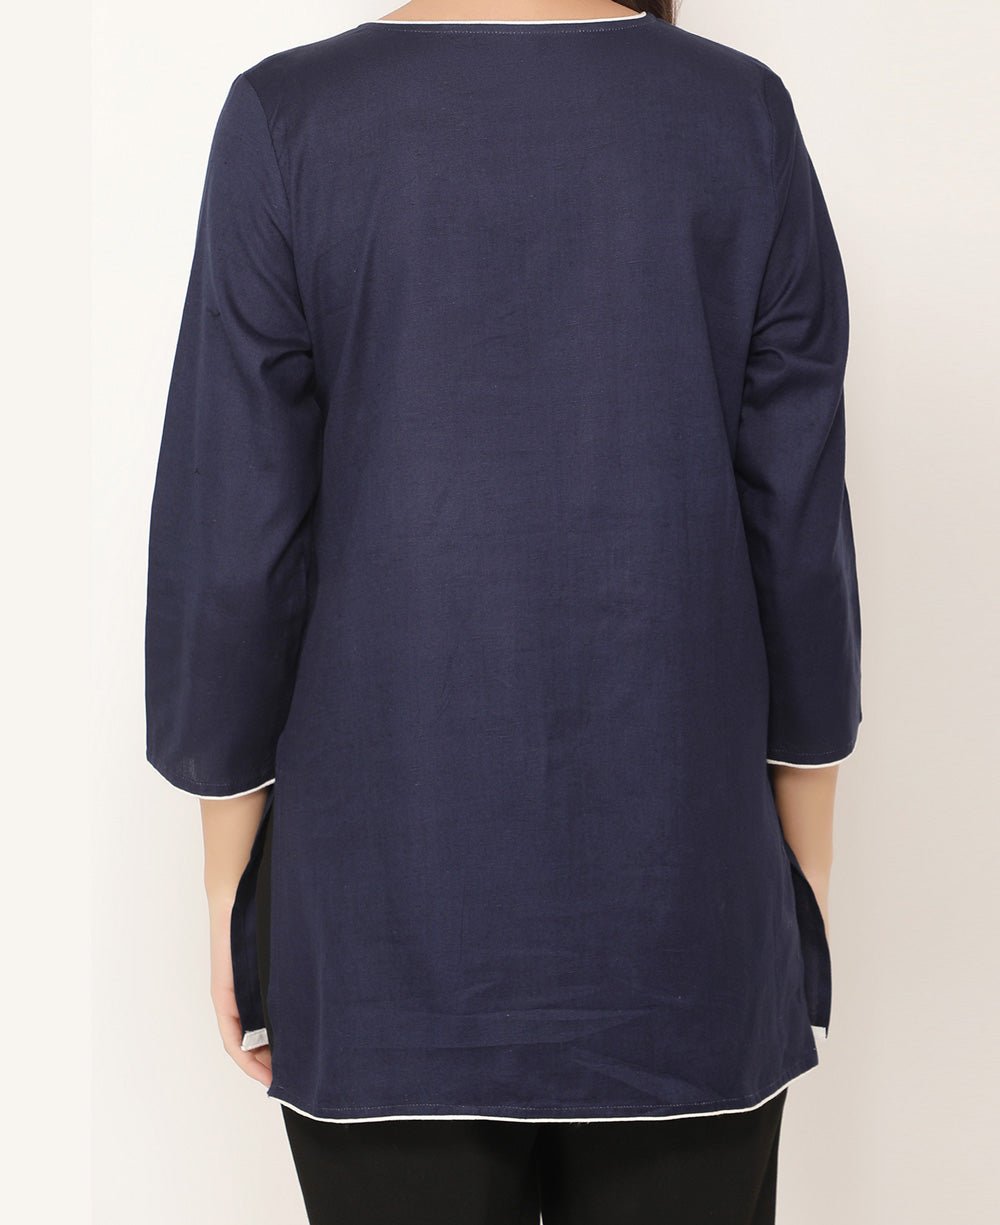 Collect Beautiful Moments Blue Tunic Top - Shirts & Tops S